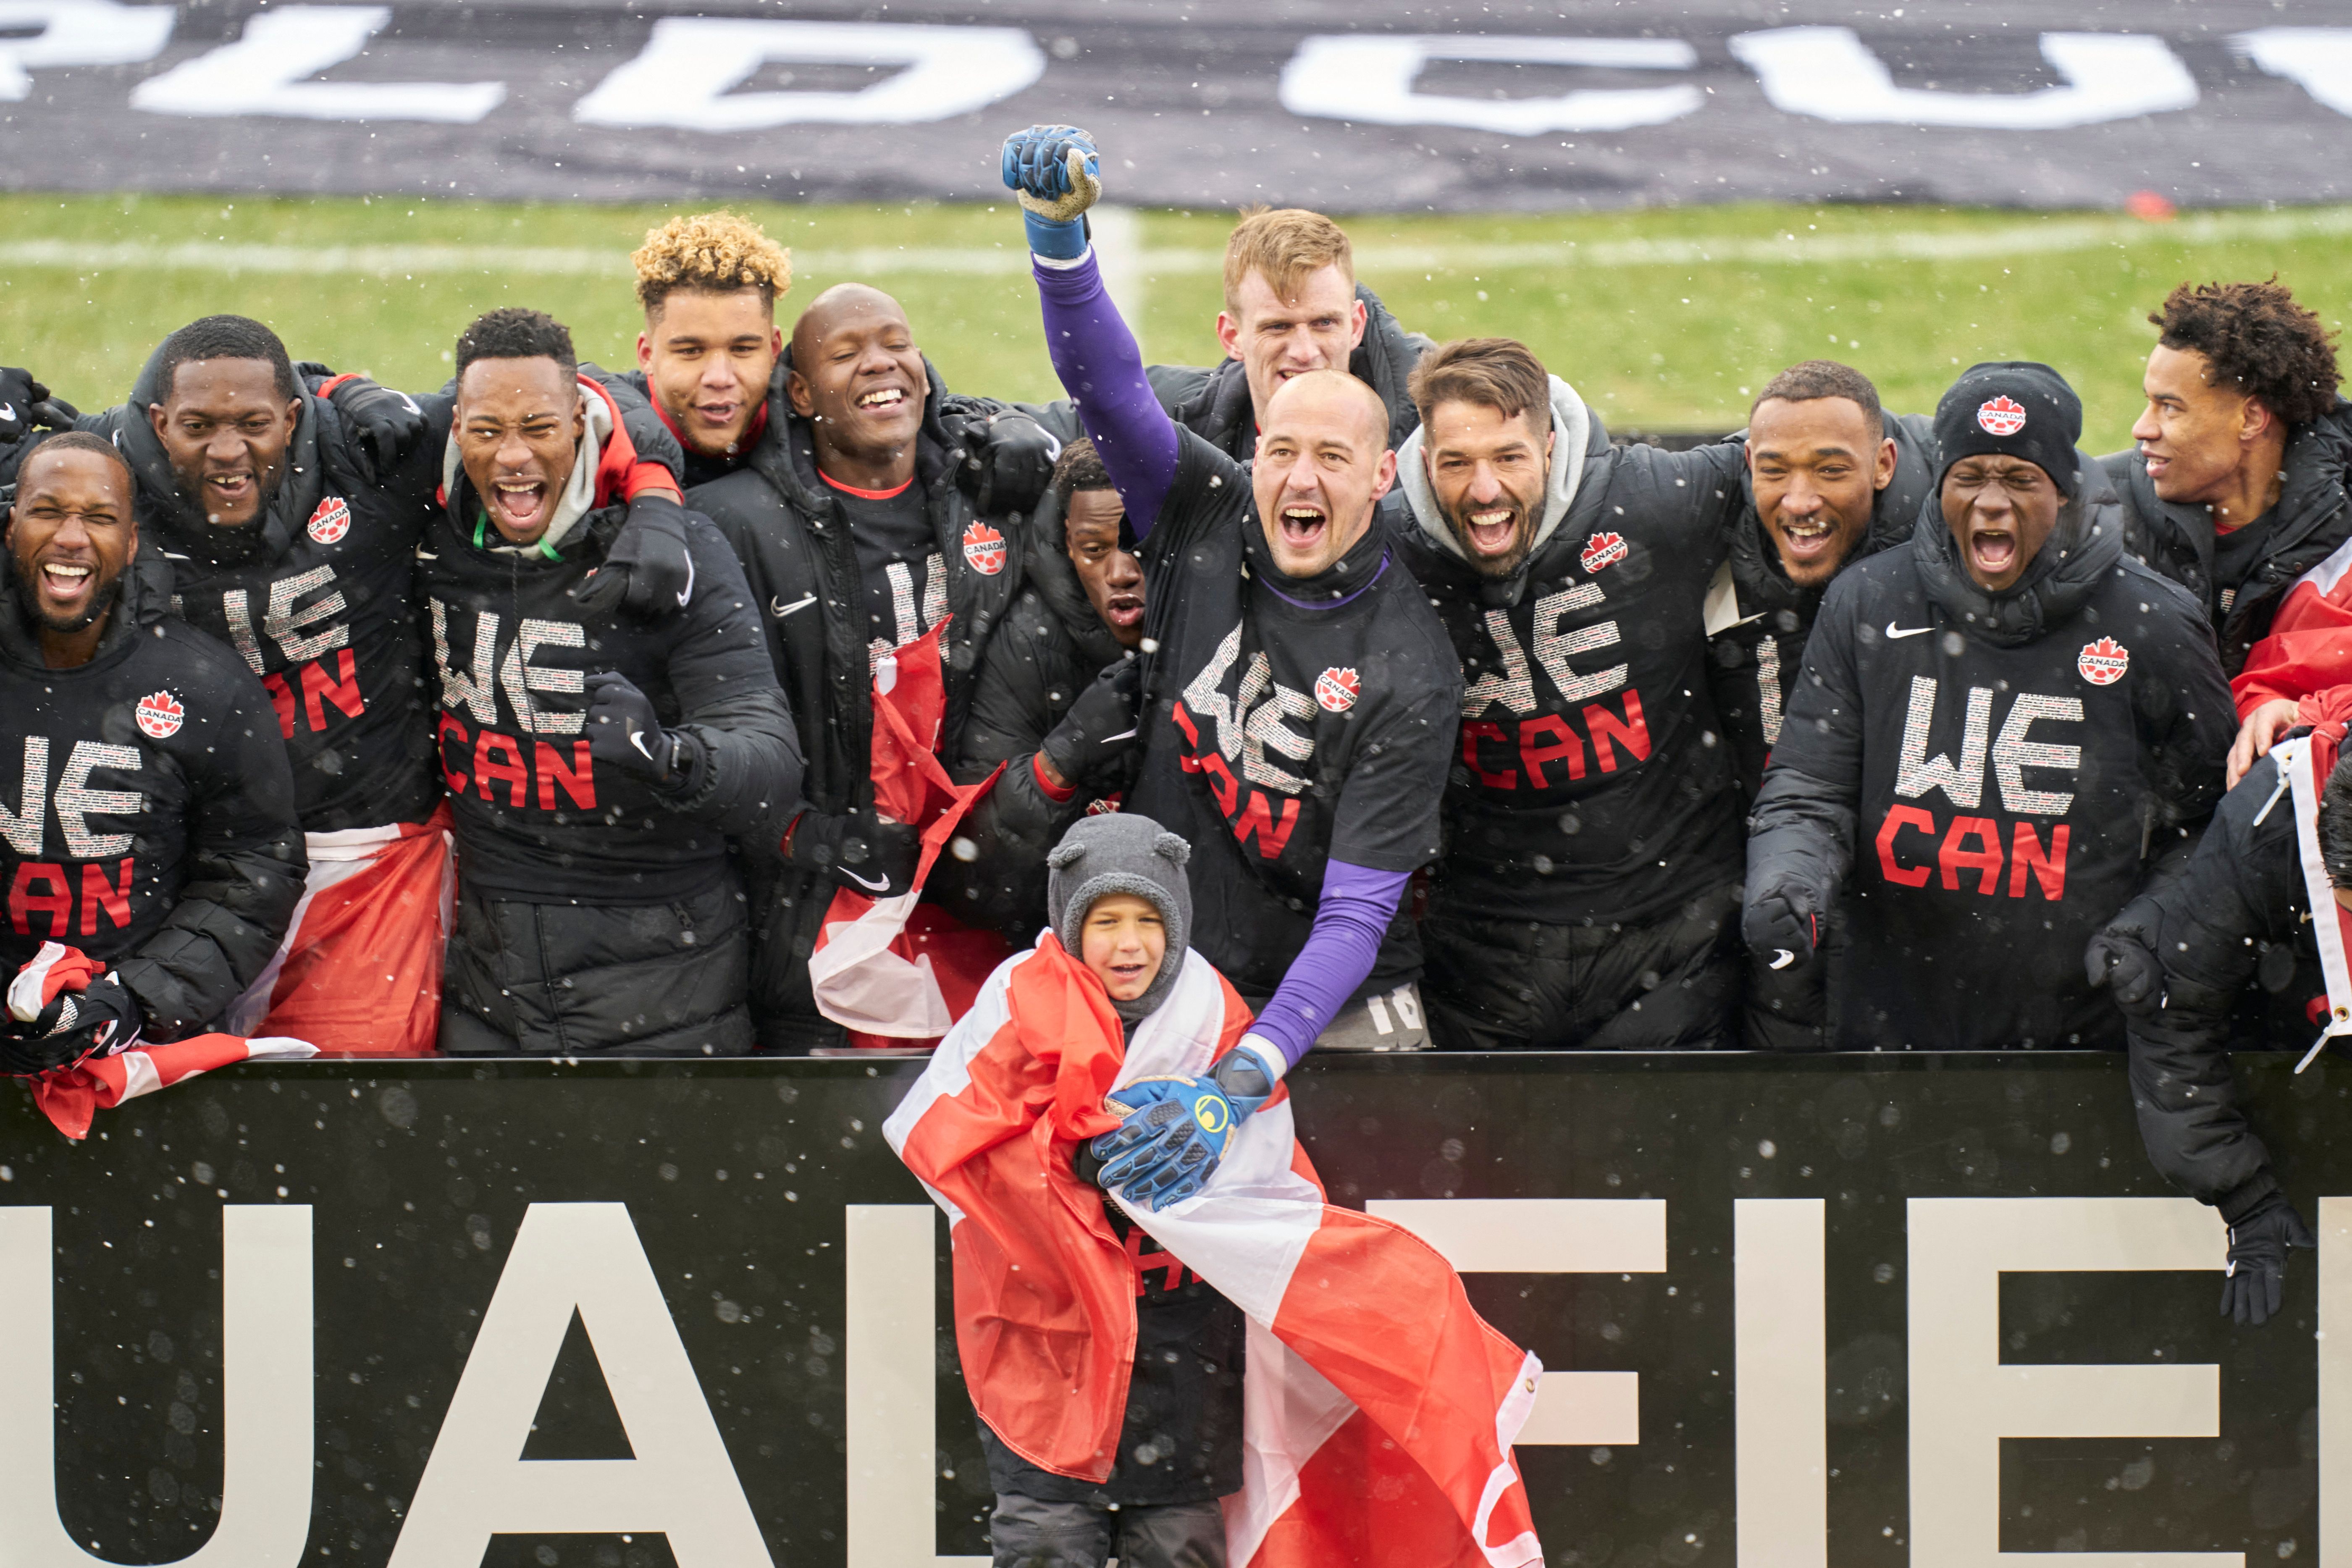 The Canadian mens national team celebrate after defeating Jamaica 4-0 in their World Cup Qualifying match at BMO Field in Toronto, Ontario, Canada on March 27, 2022. - Canada qualified for the World Cup for the first time in 36 years on Sunday with an emphatic 4-0 victory over Jamaica in Toronto.